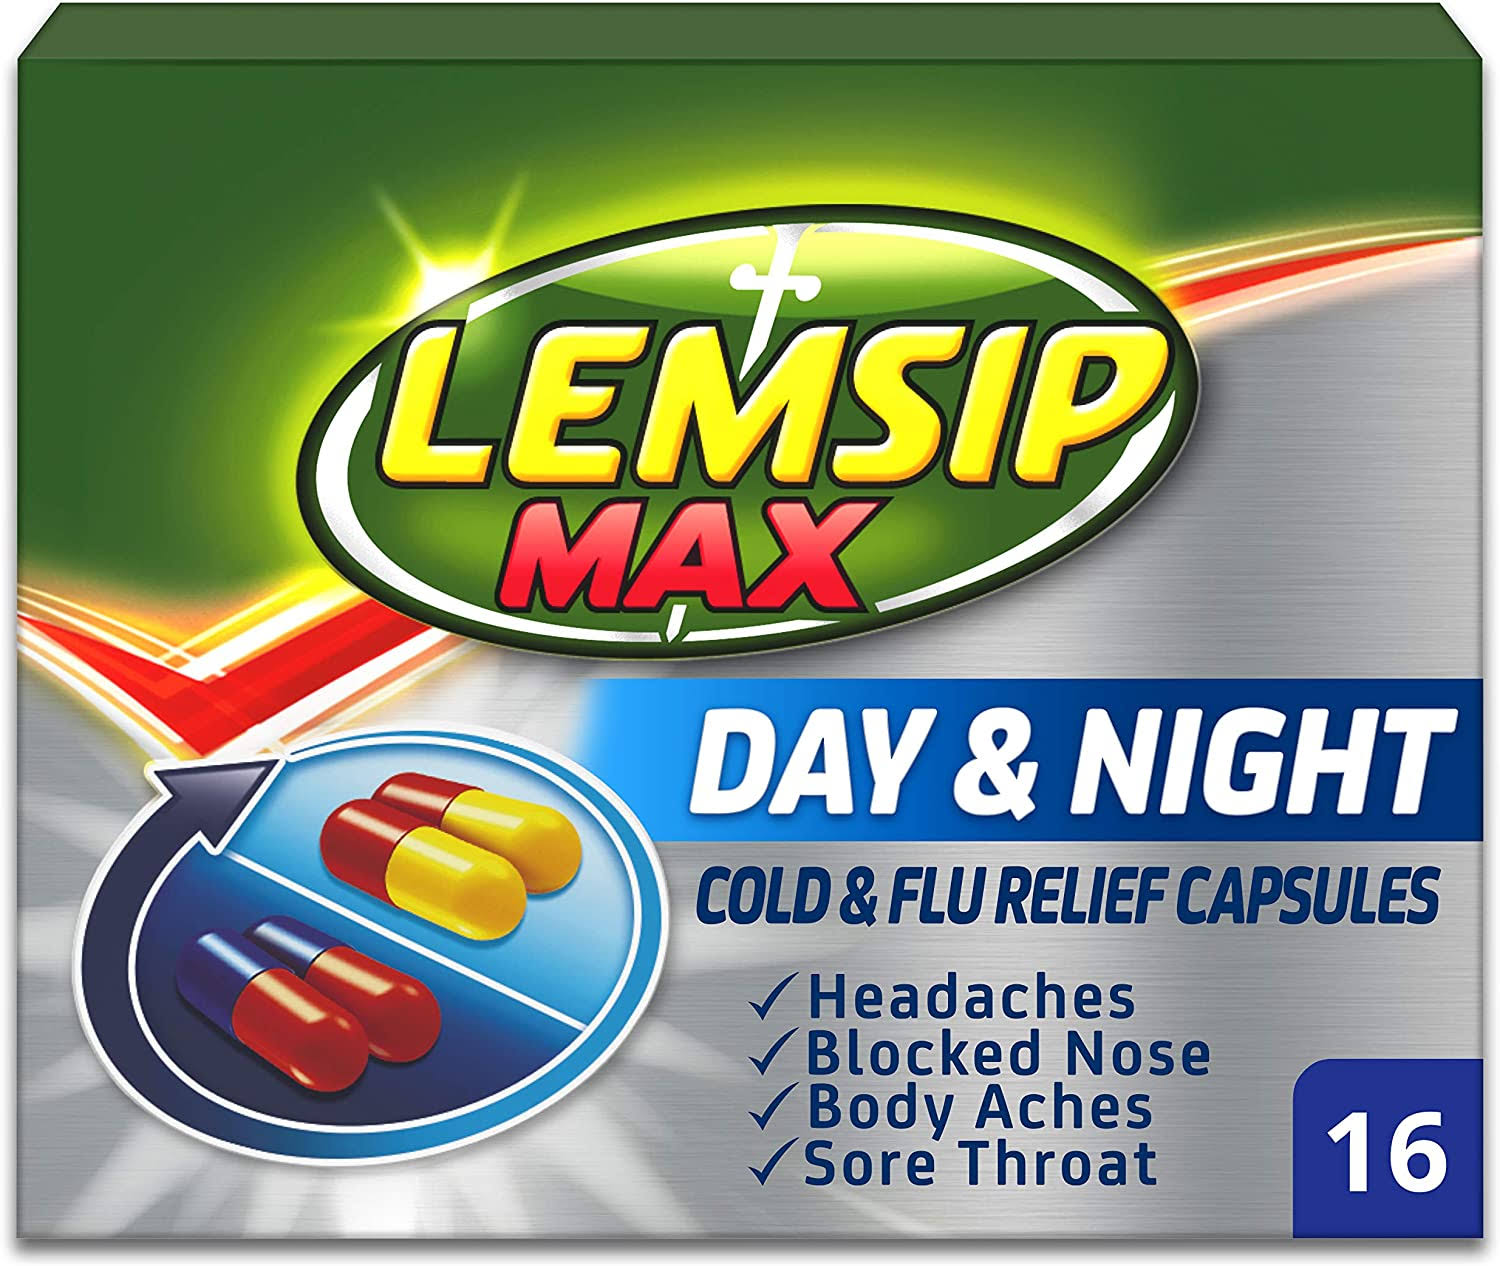 Lemsip Max Day and Night Cold and Flu Relief Capsules - 16 Pack